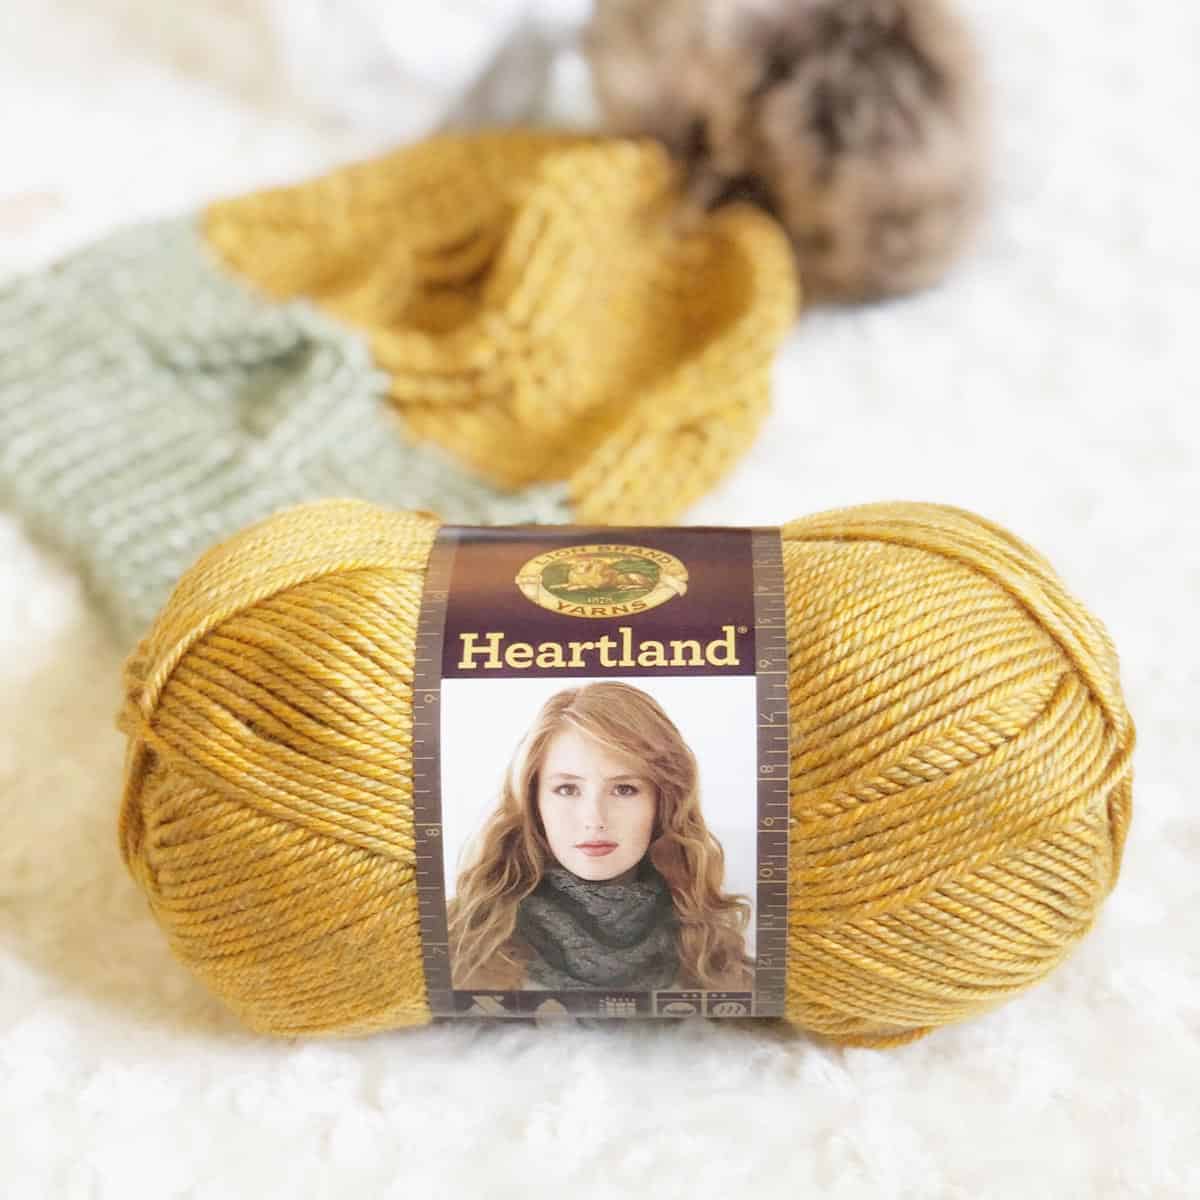 Free crochet cabled hat pattern made with Lion Brand Heartland yarn.